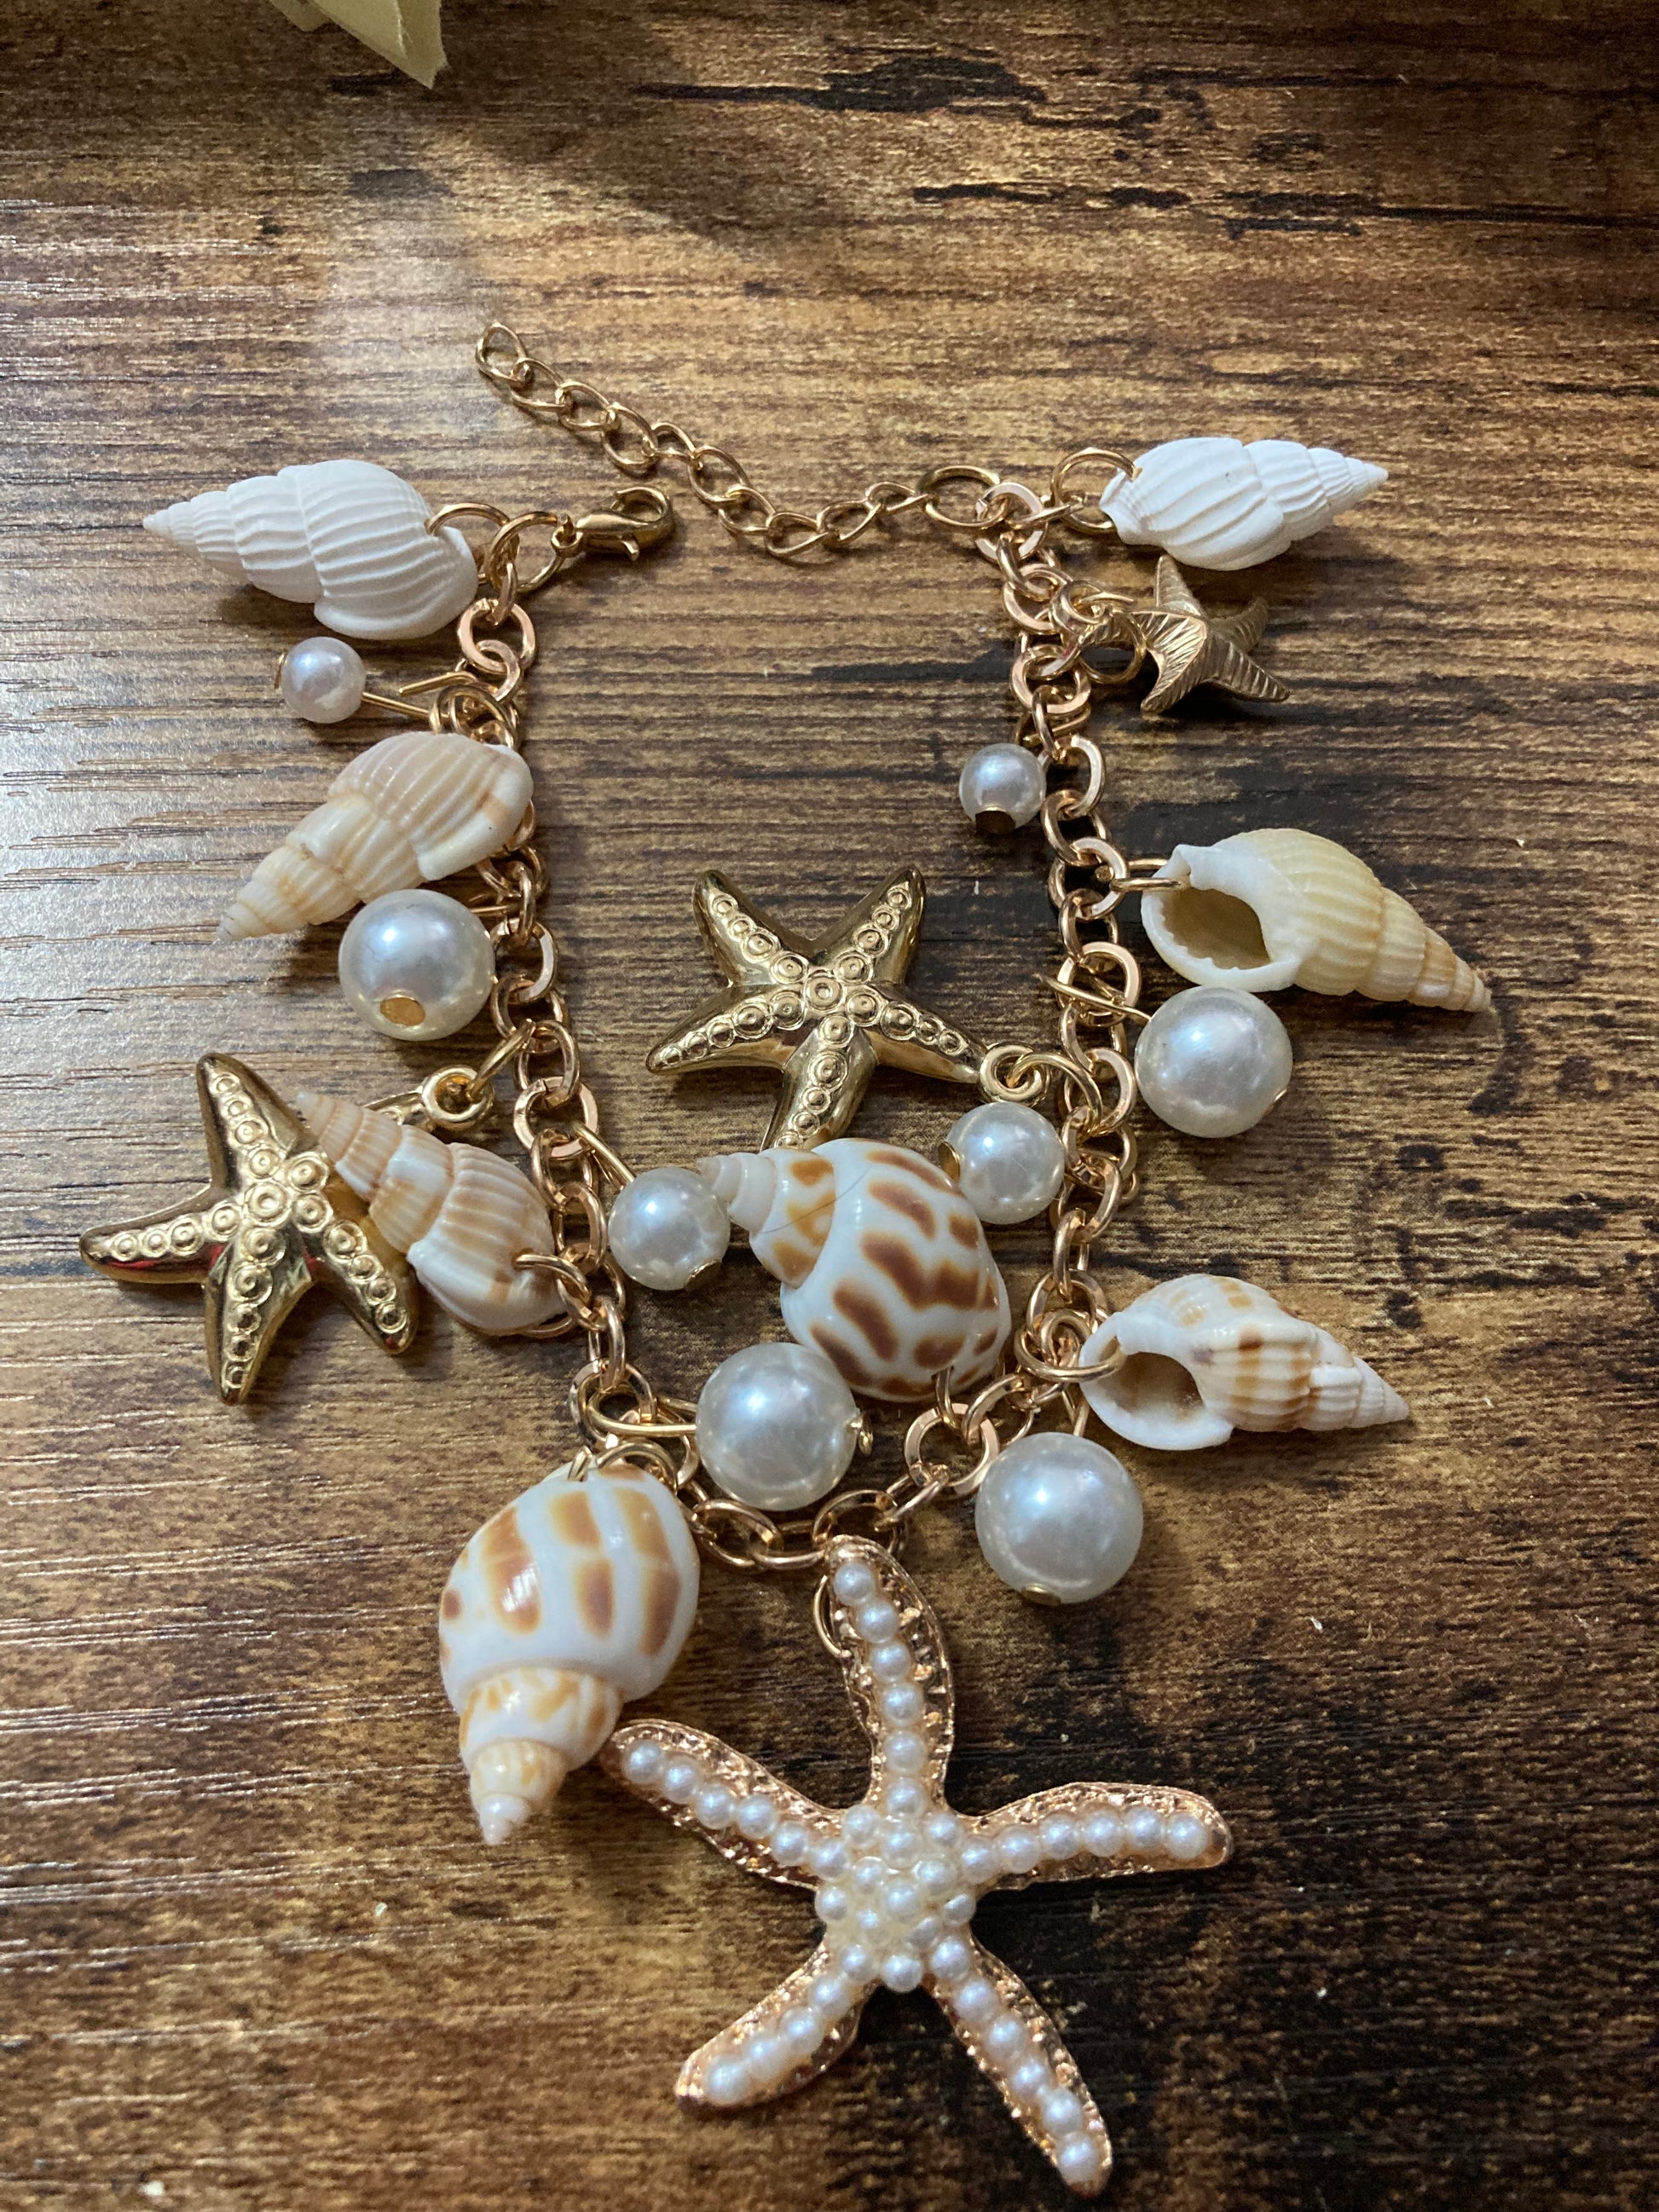 Pearl Charm Bracelet with Silver Chain